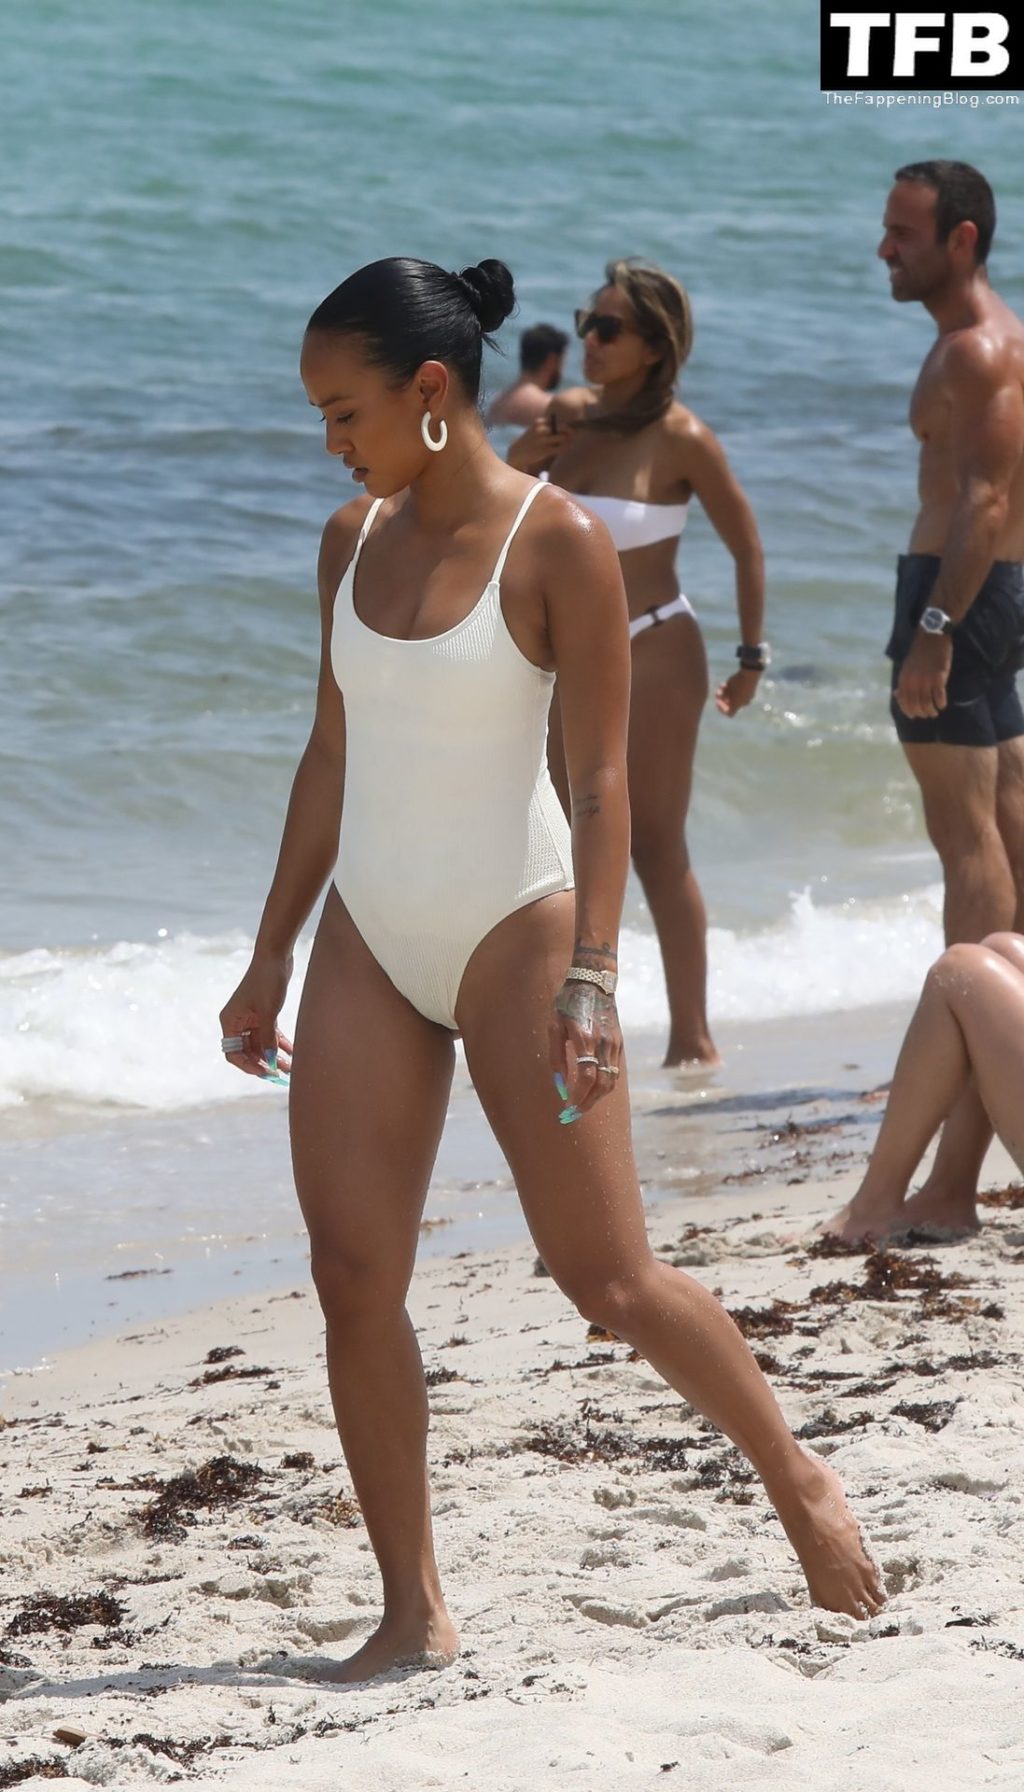 Karrueche Tran Sexy The Fappening Blog 43 1024x1792 - Karrueche Tran Looks Incredible in a White Swimsuit on the Beach in Miami (45 Photos)